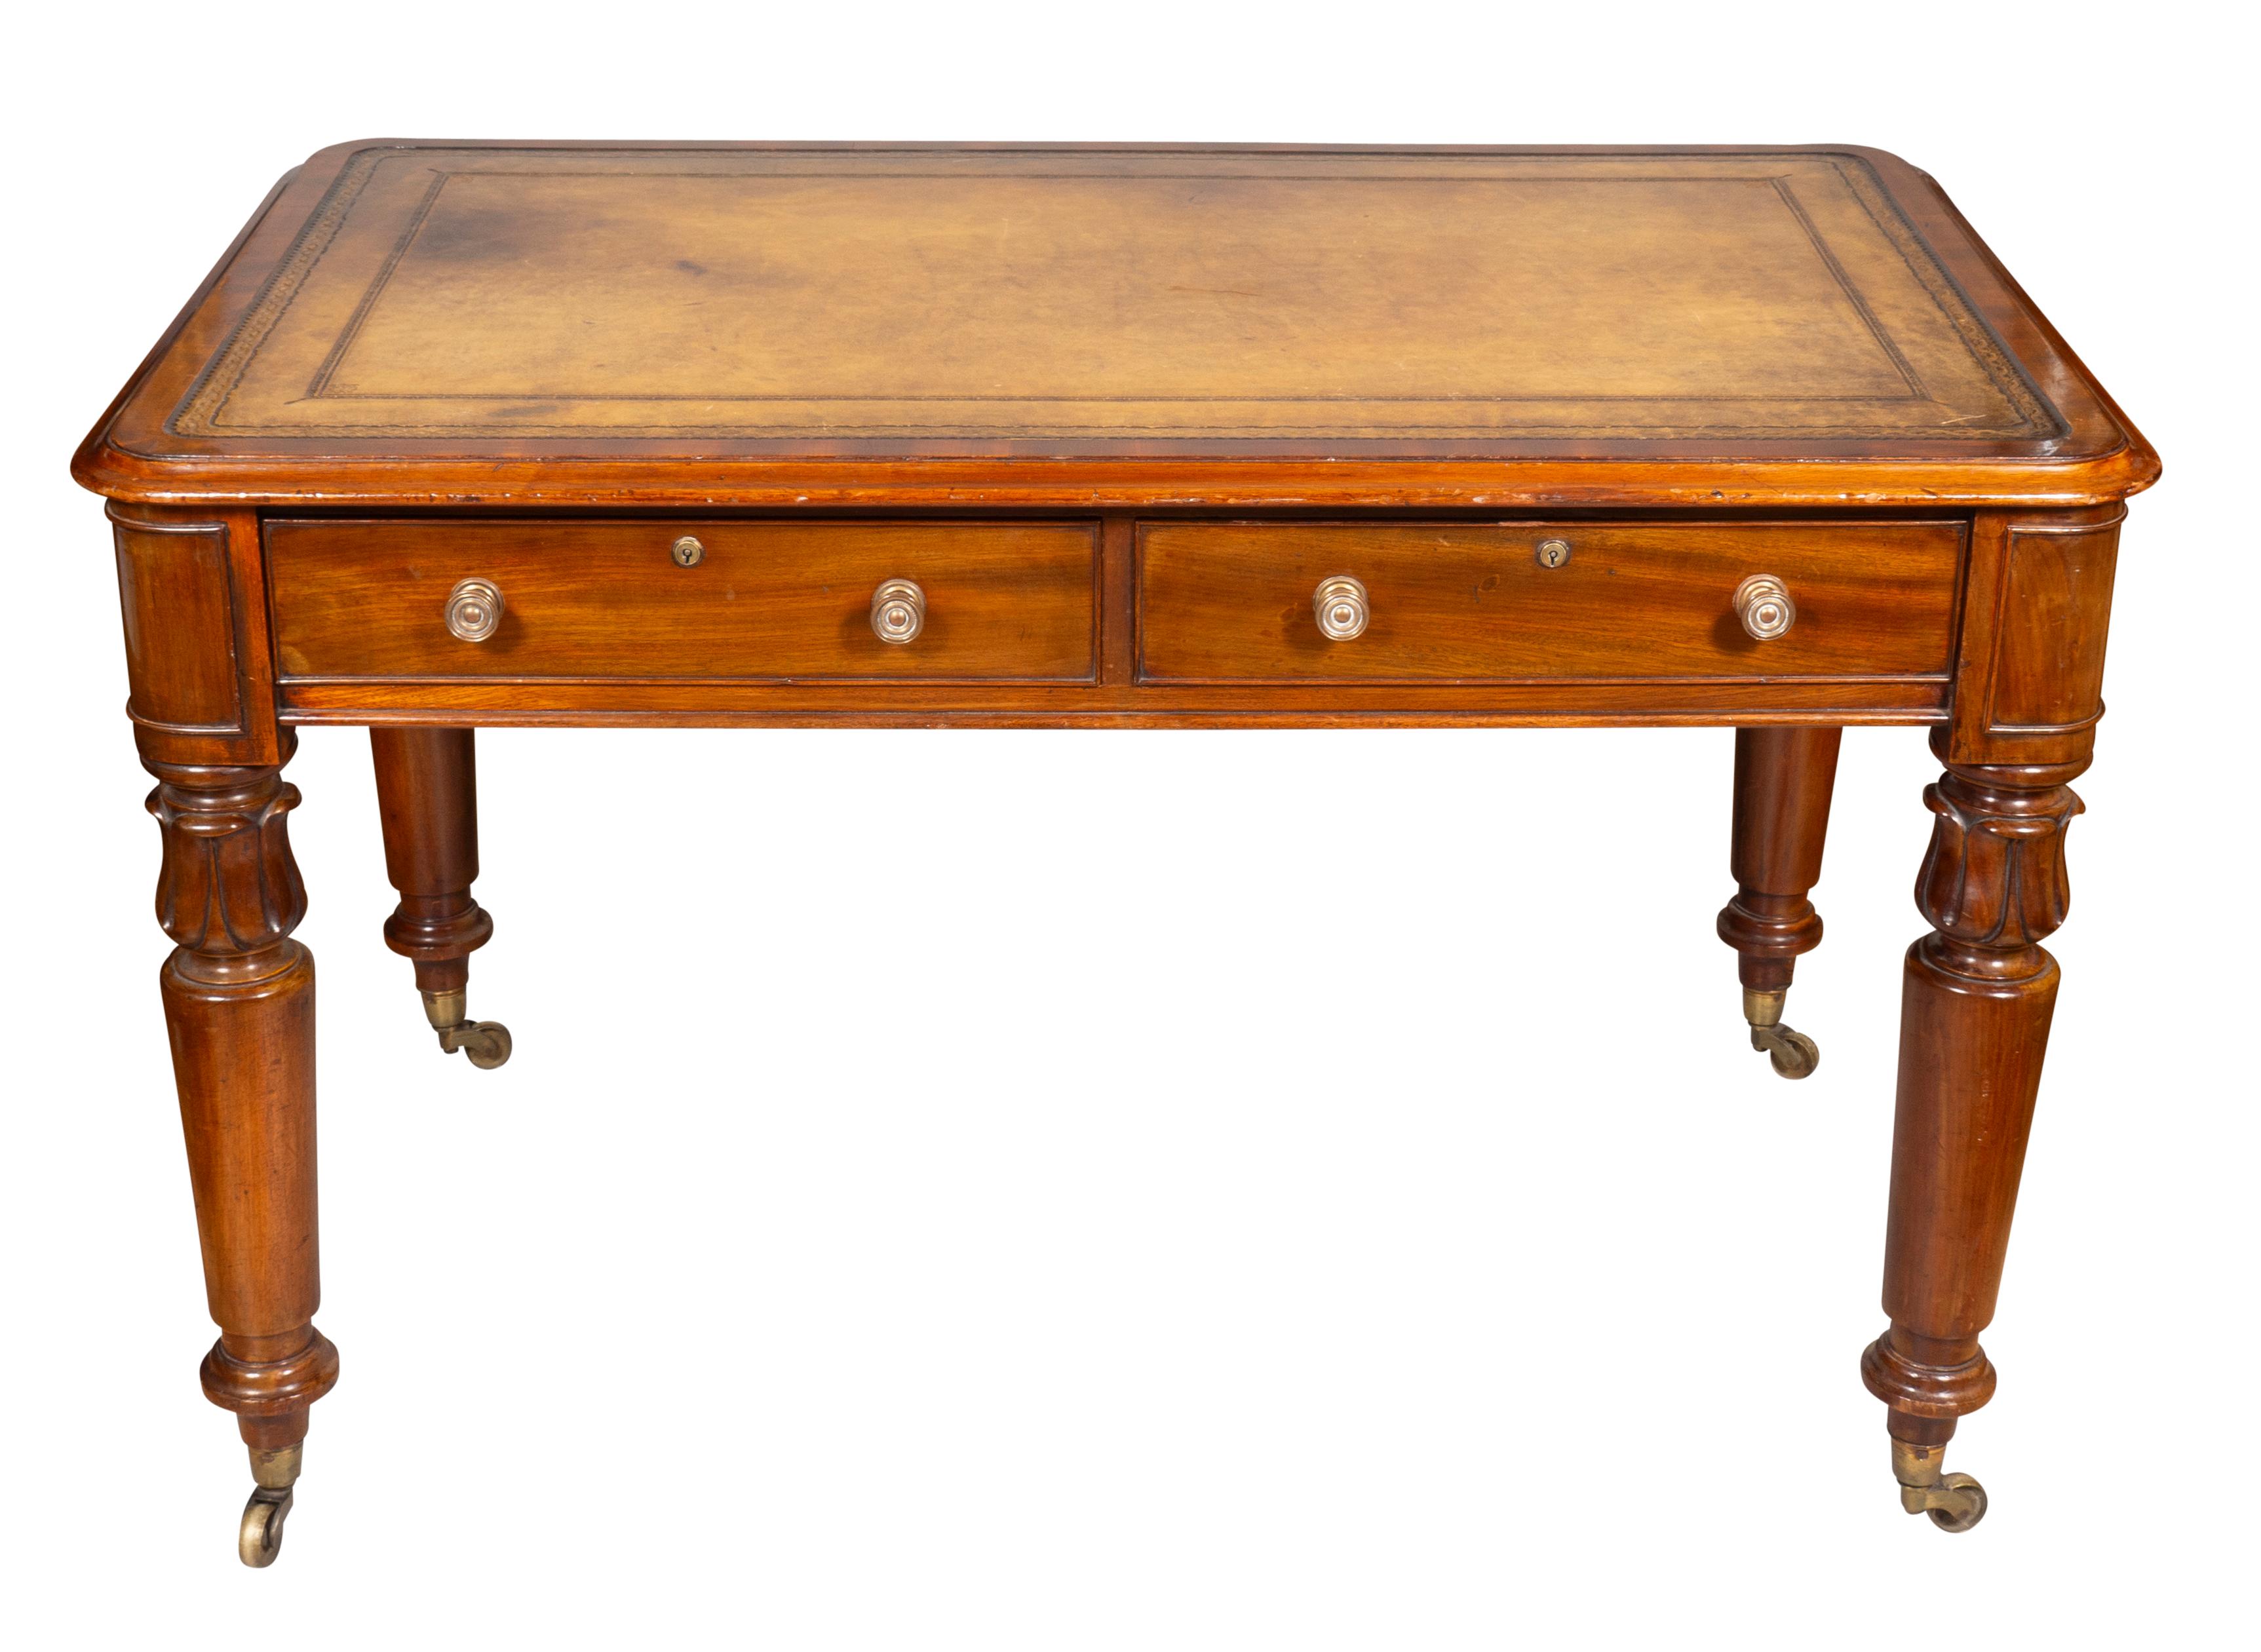 Typical form with rectangular top with inset brown leather over two drawers flanked by rounded paneled ends, raised on lotus carved turned tapered legs and casters.